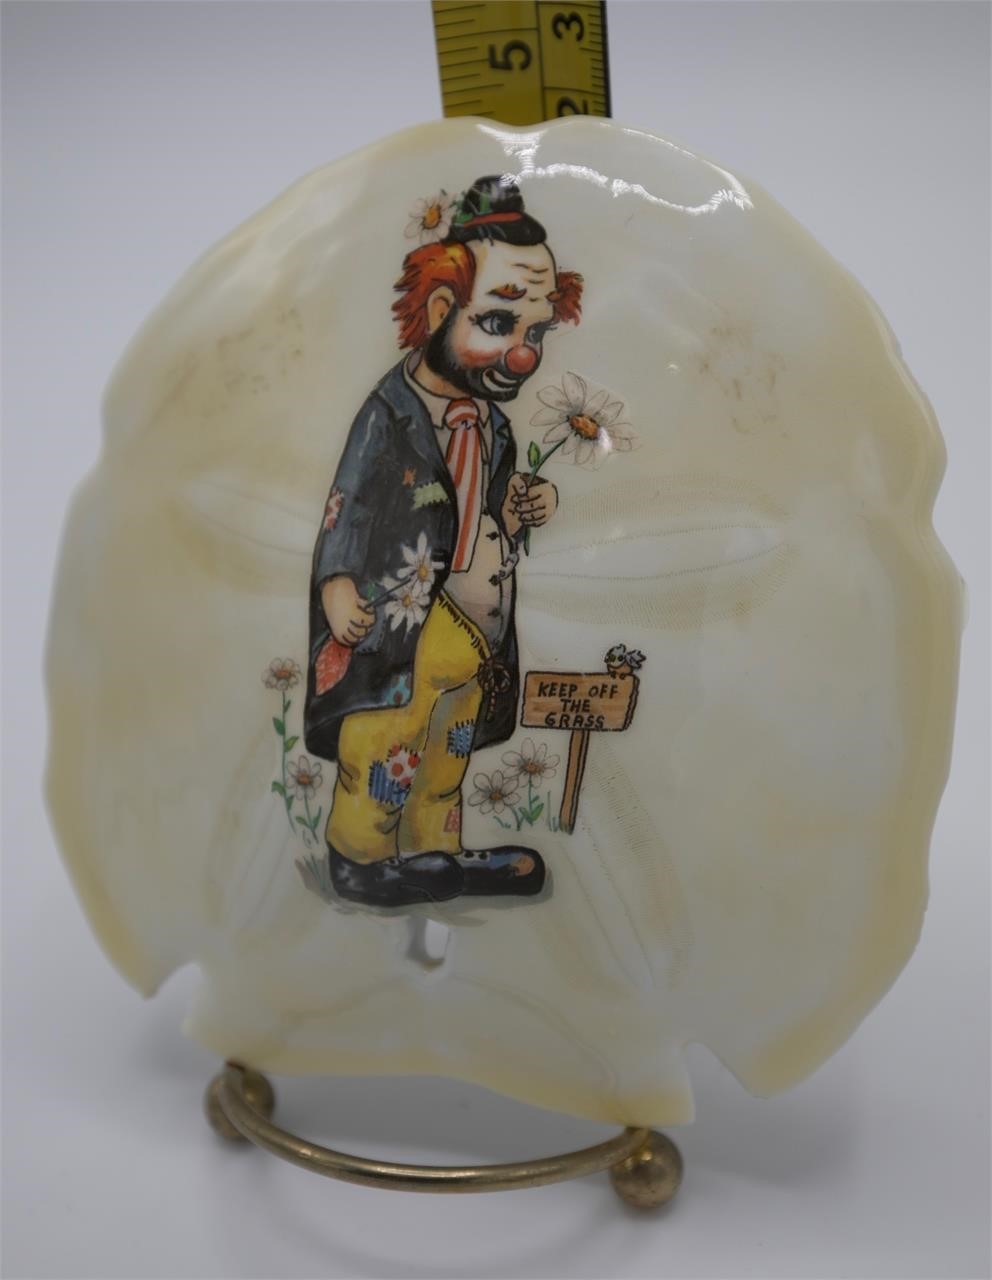 Wind-up Musical Painted Clown on Sand Dollar